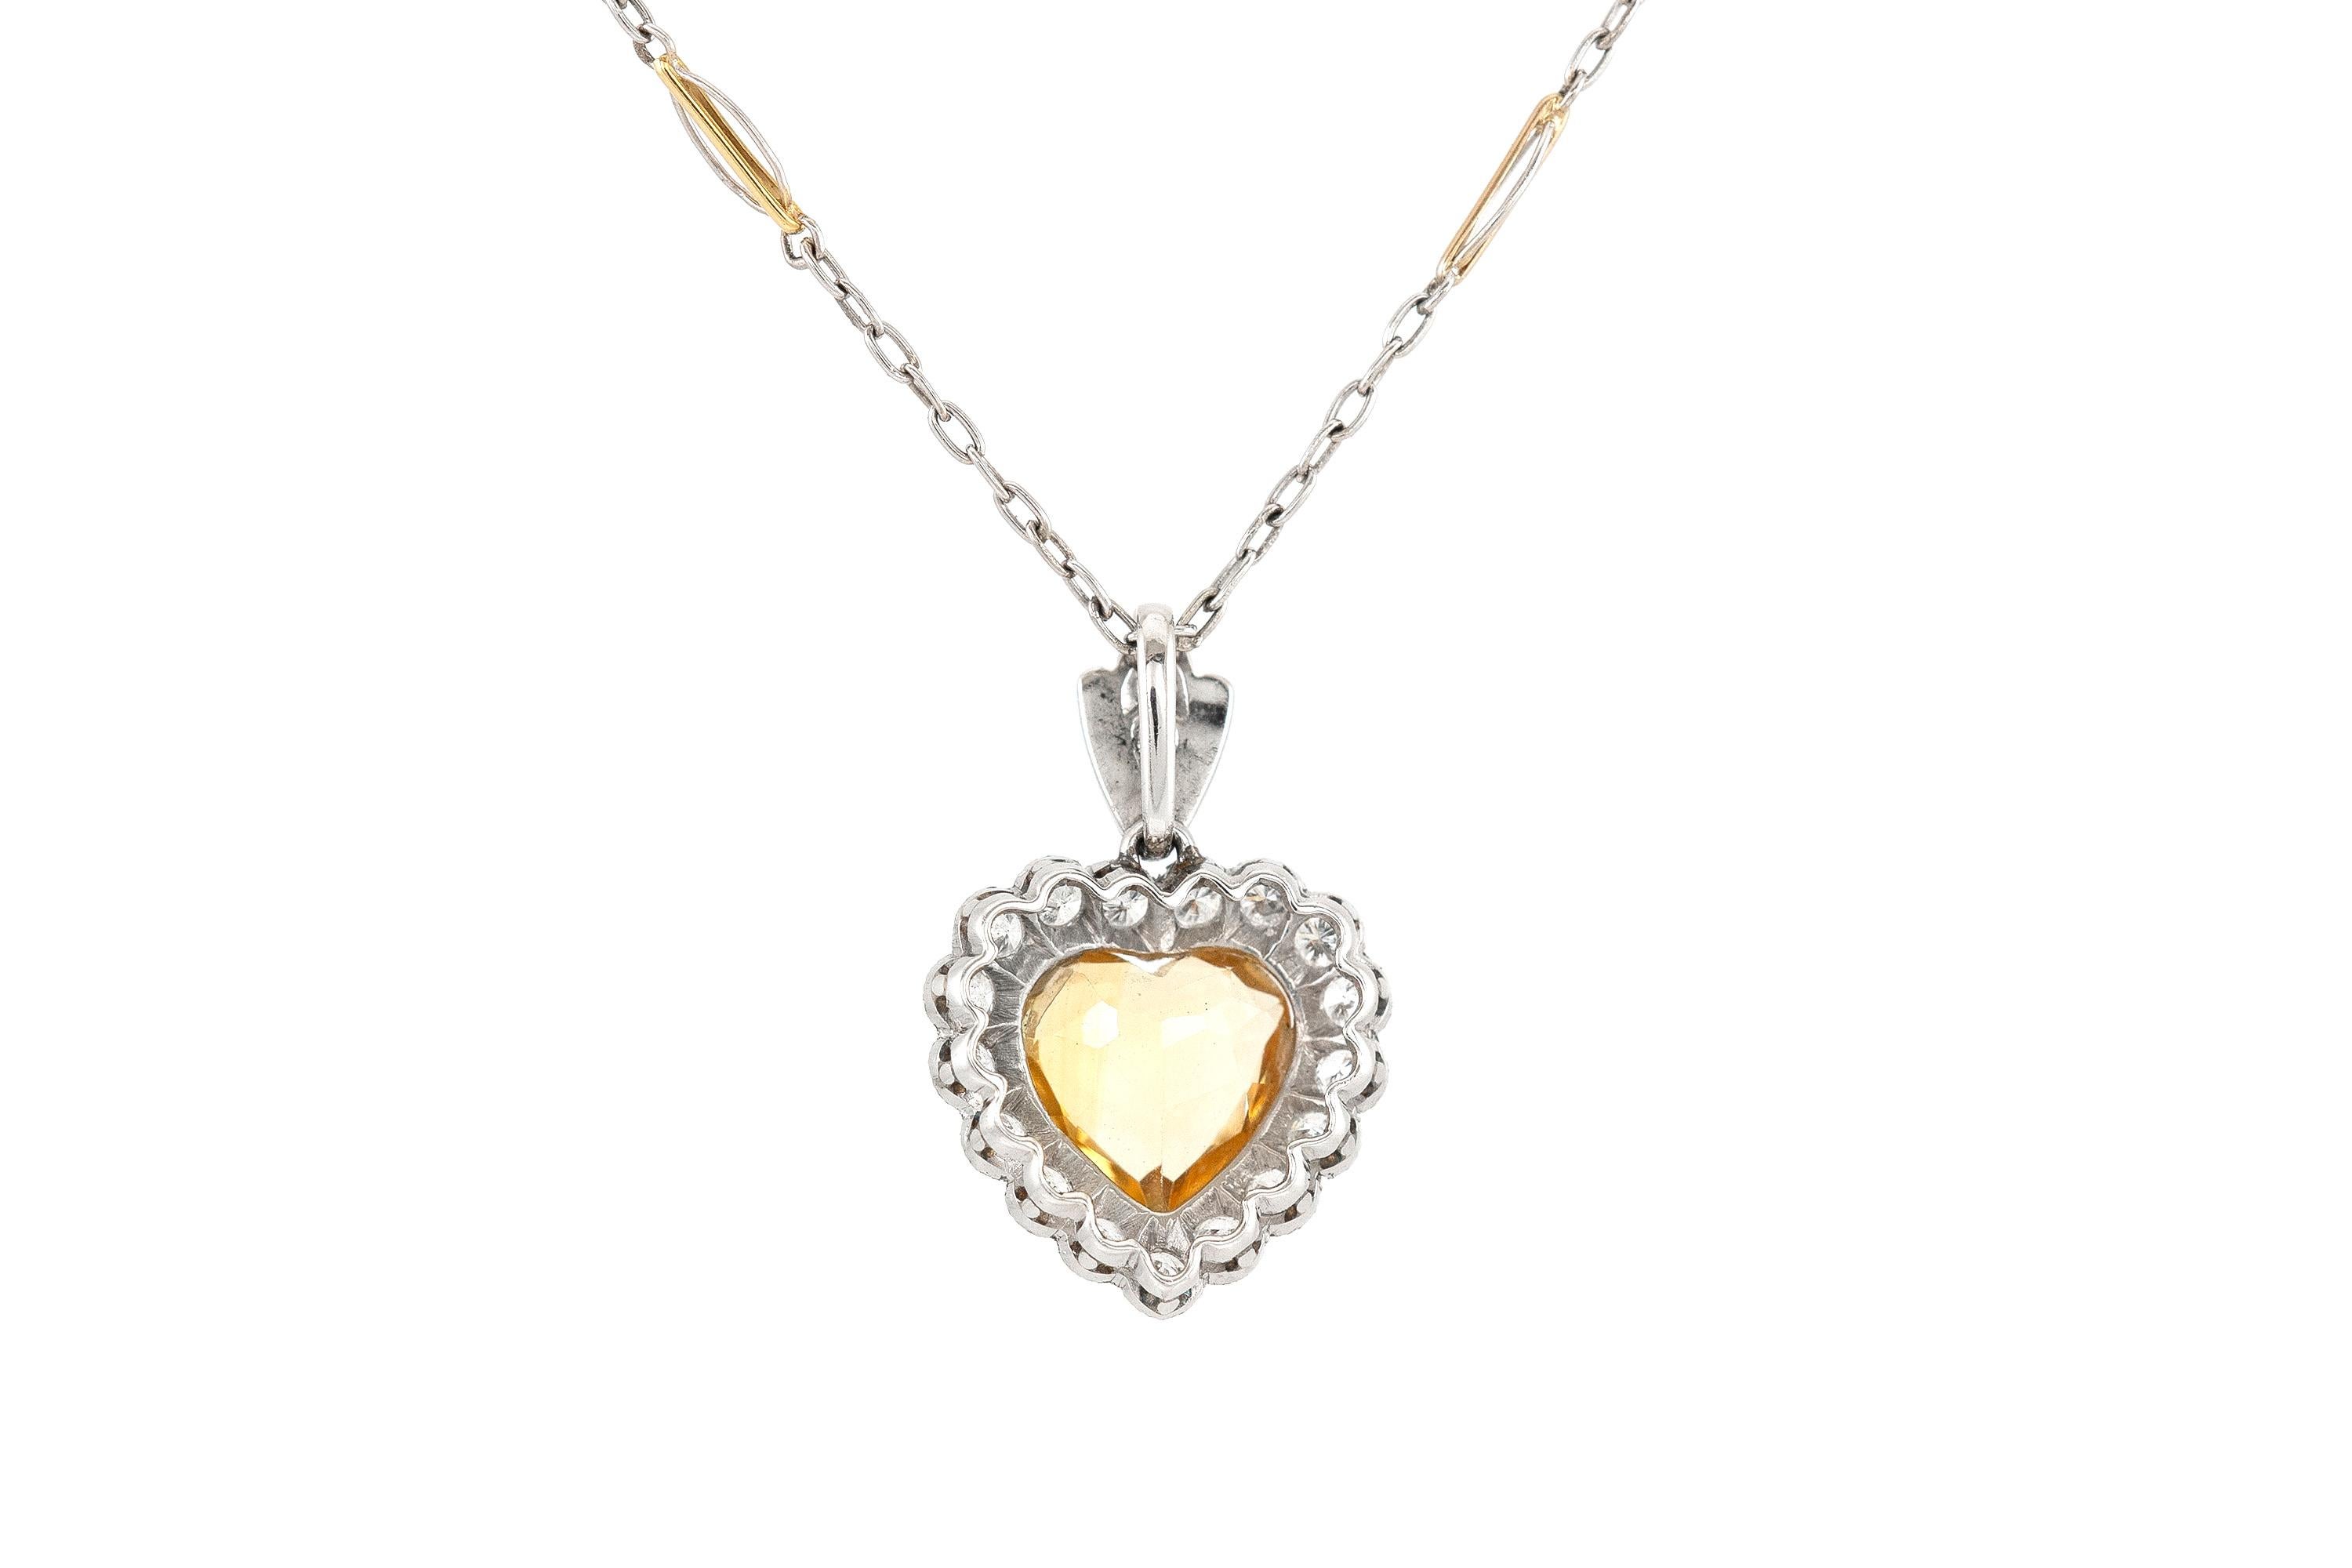 The necklace is finely crafted in 14k white gold, a citrine stone and diamonds weighing a total of 0.50 dwt. Circa 1970.